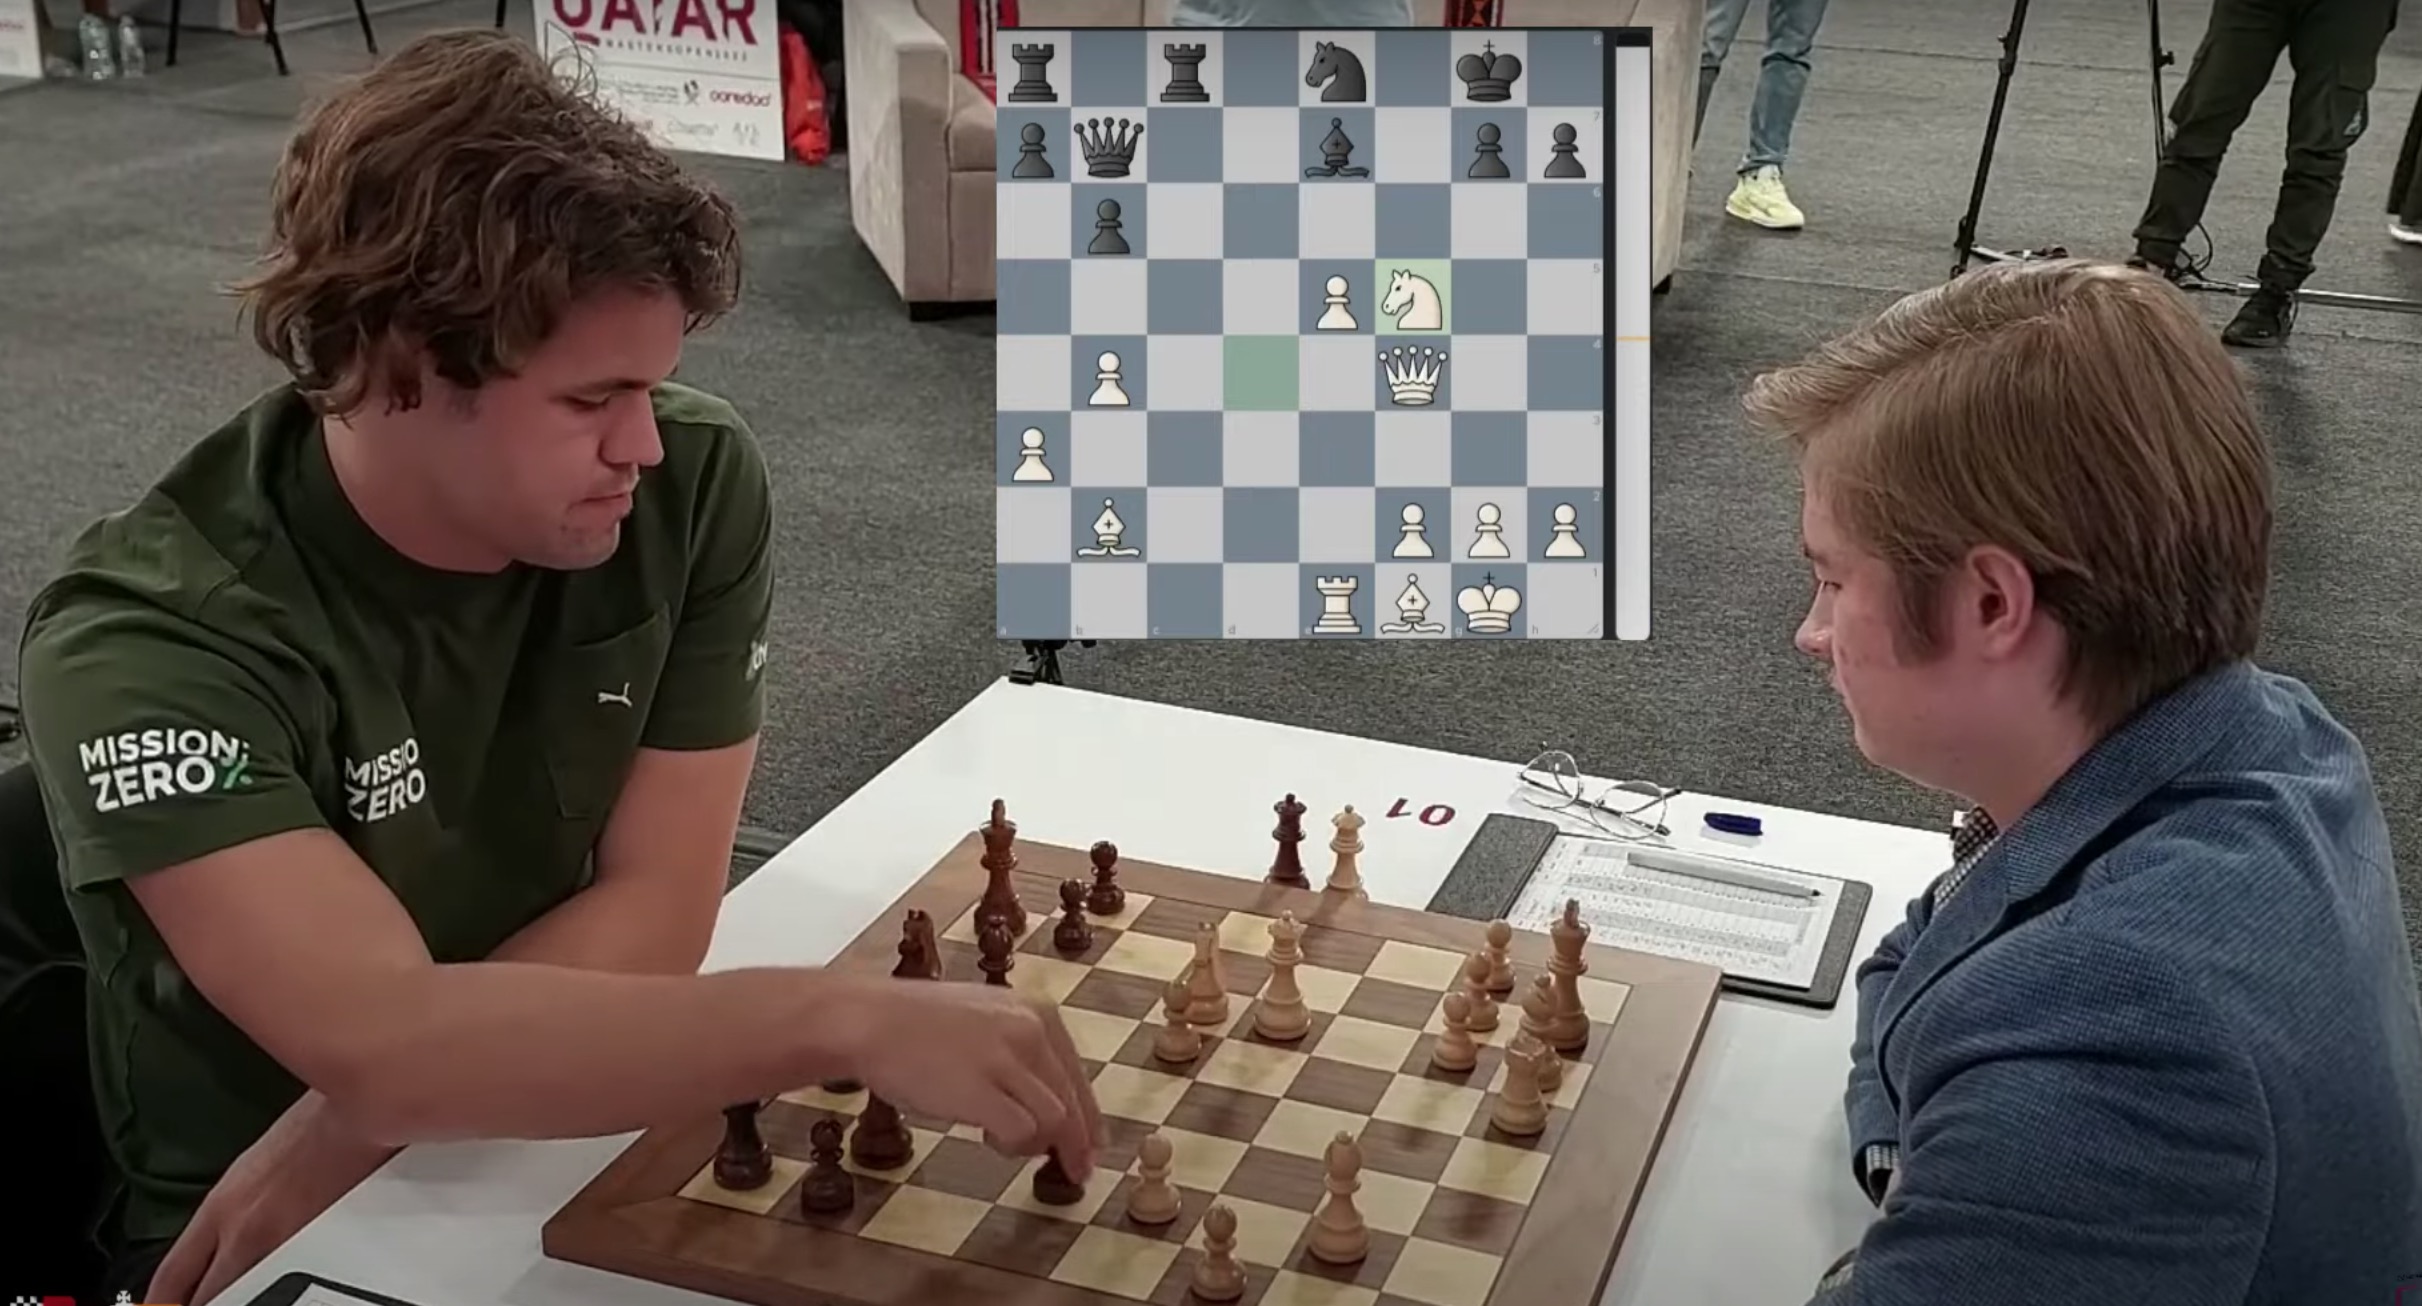 Magnus Carlsen Finally Offers Some Commentary on Chess Cheating Accusations